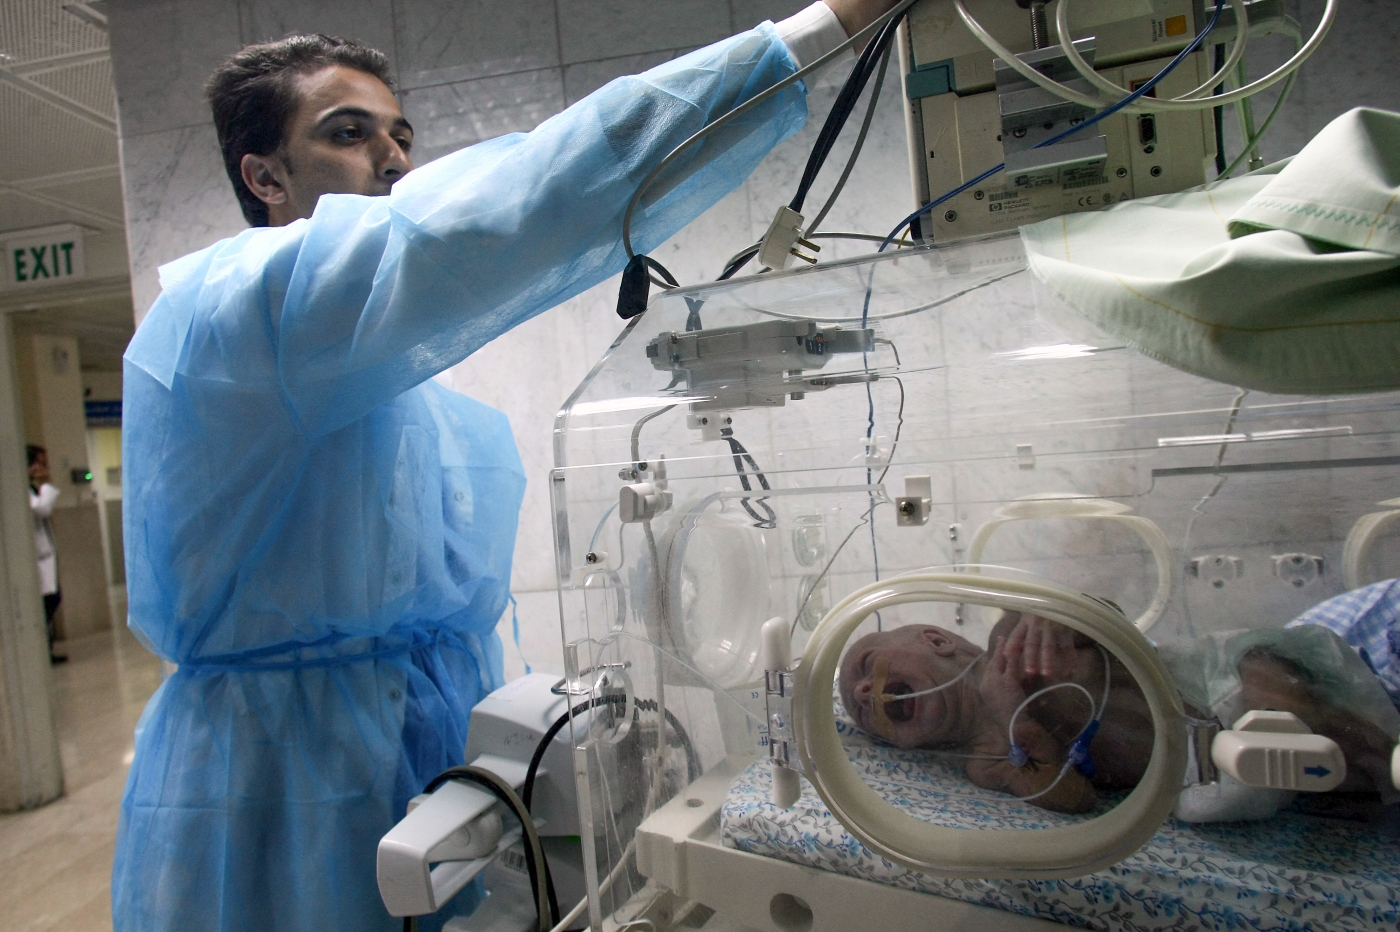 A Palestinian medic fixes the wires of a baby incubator at the al-Makassed in occupied East Jerusalem (AFP/file)